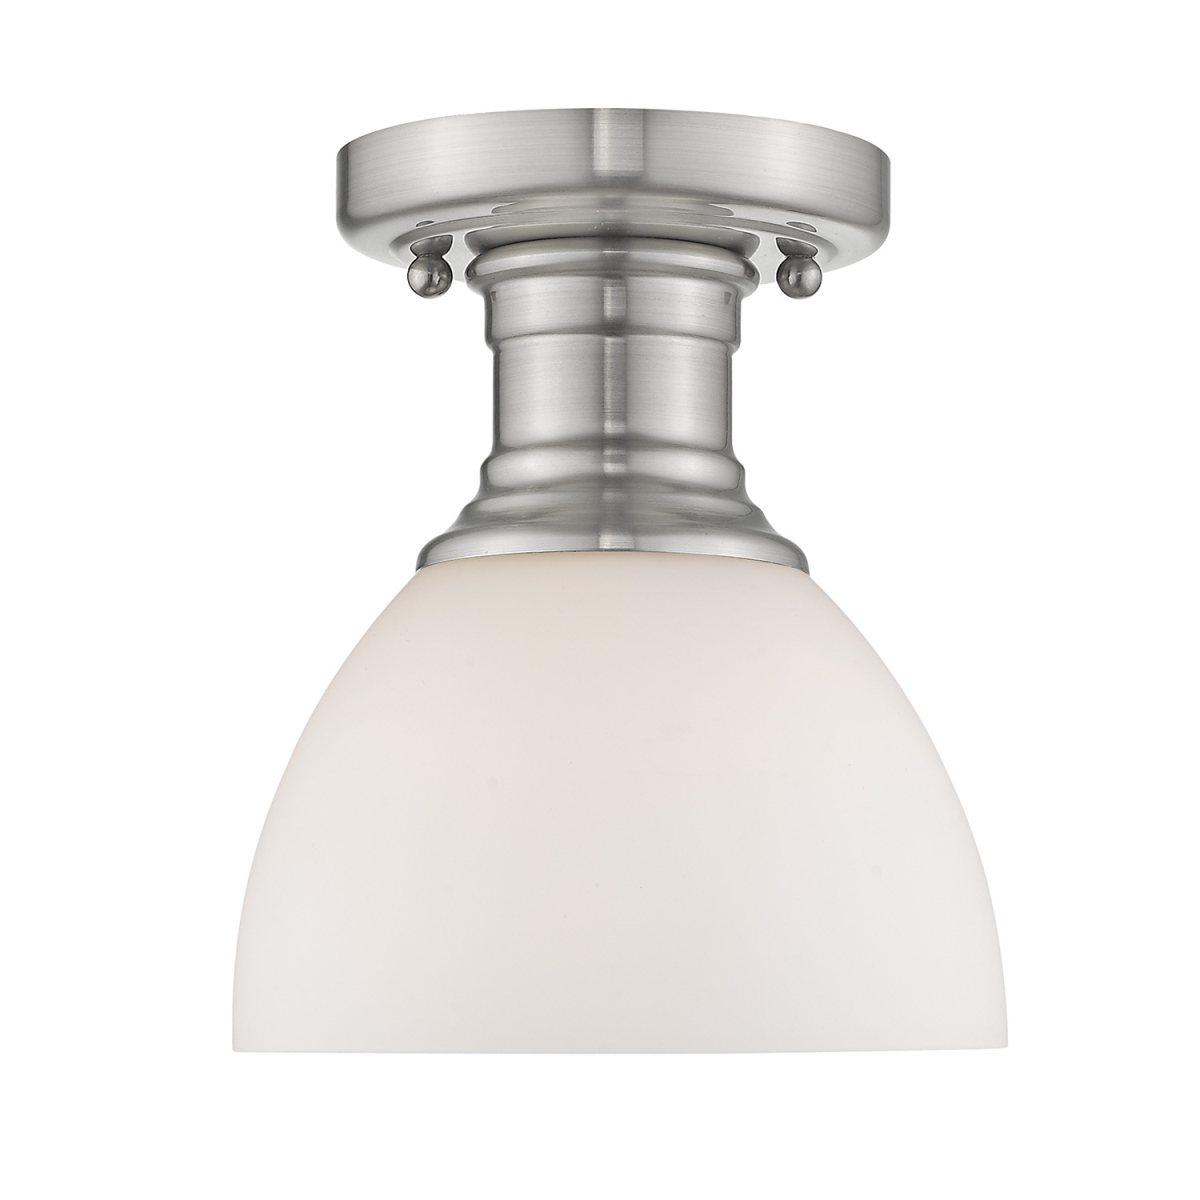 3118-sf Pw-op Hines Semi-flush Mount Light With Opal Glass, Pewter